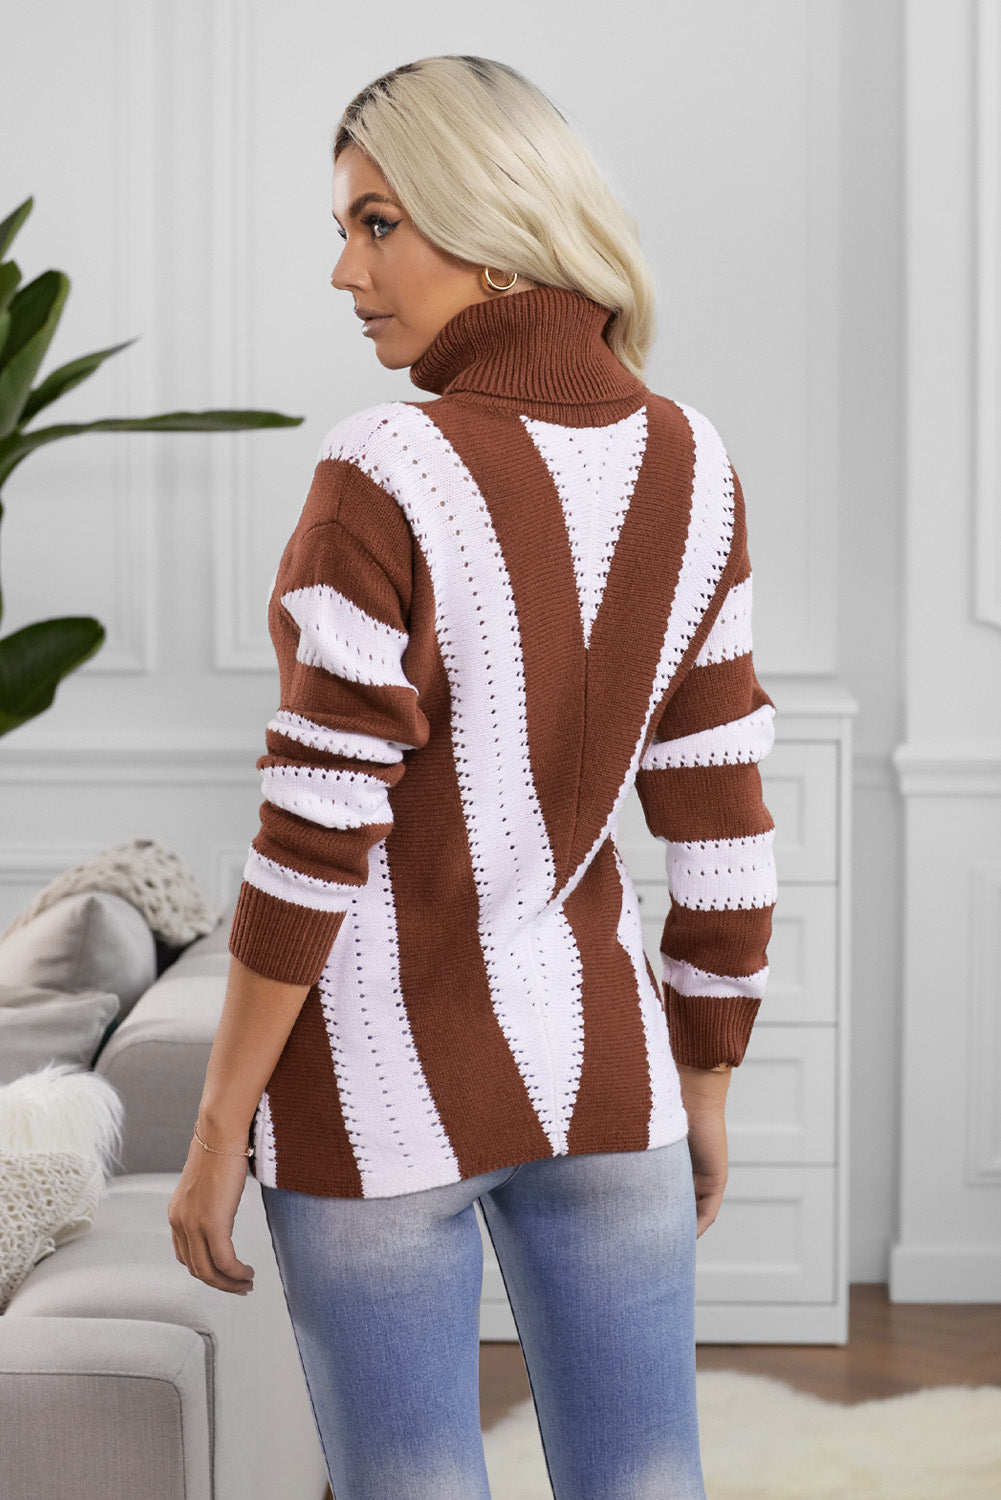 Pull Femme Col Roule a Rayures Marron et Blanc